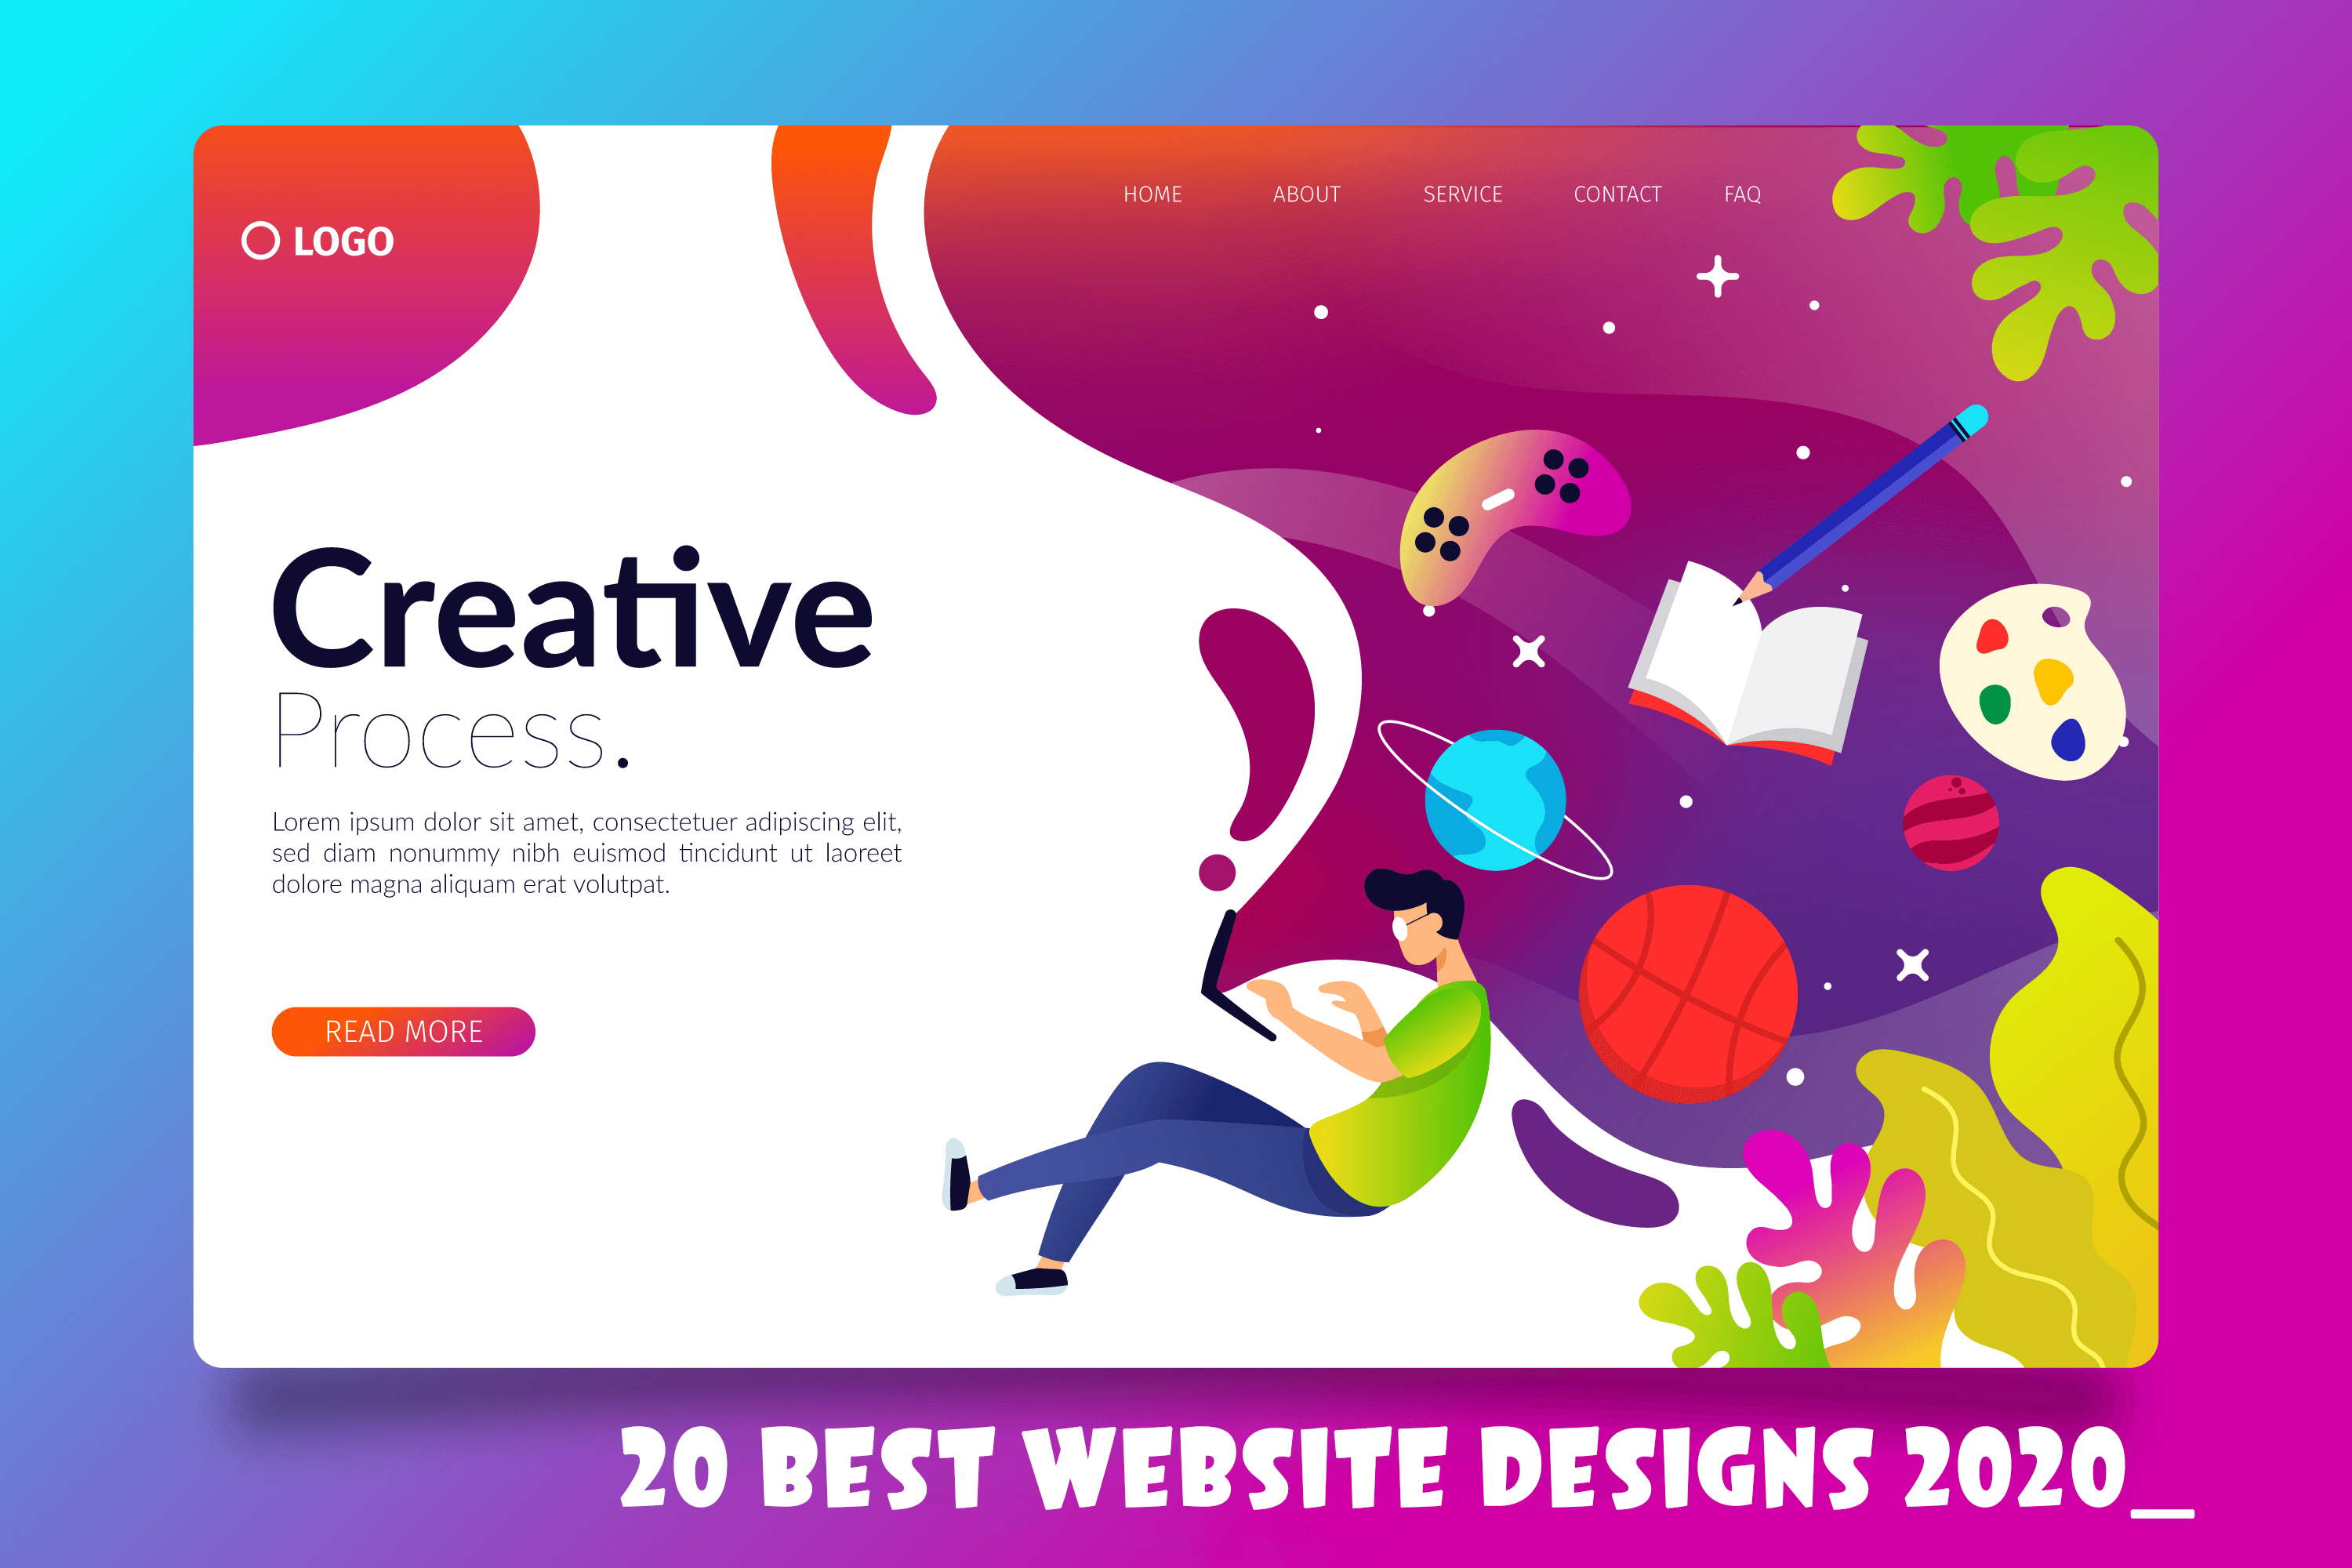 Check Out the Best Portfolio Websites for Designers